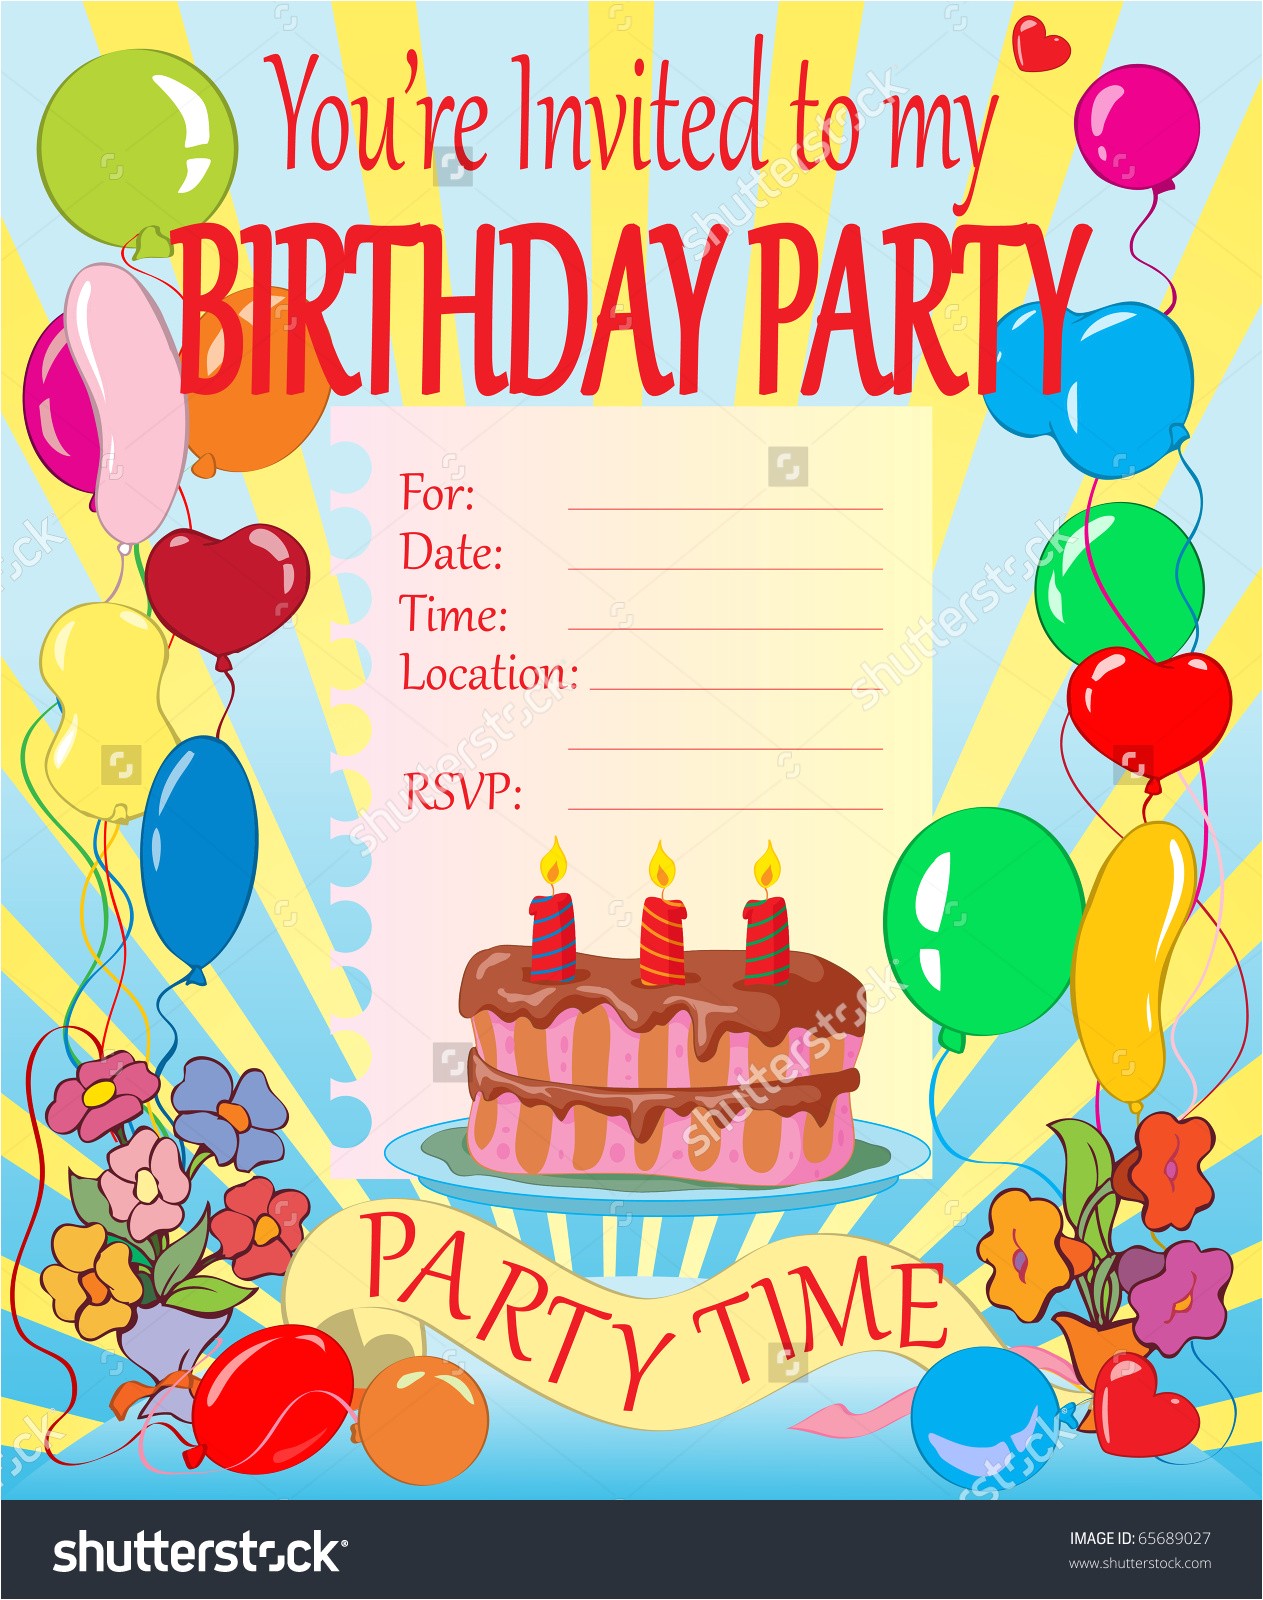 top 19 invitation cards for birthday party